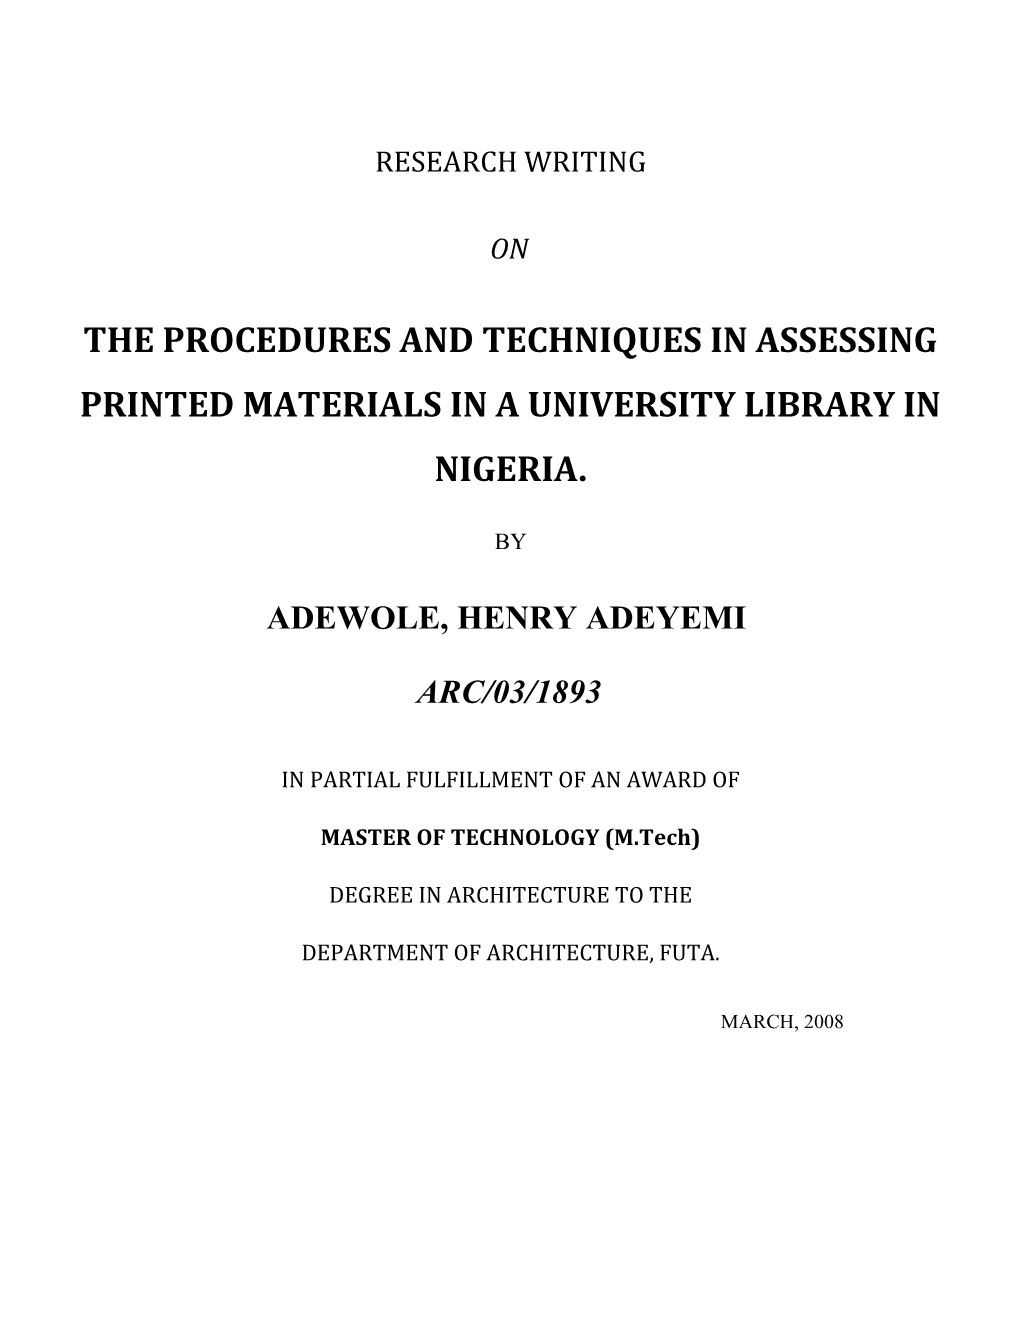 The Procedures and Techniques in Assessing Printed Materials in a University Library In